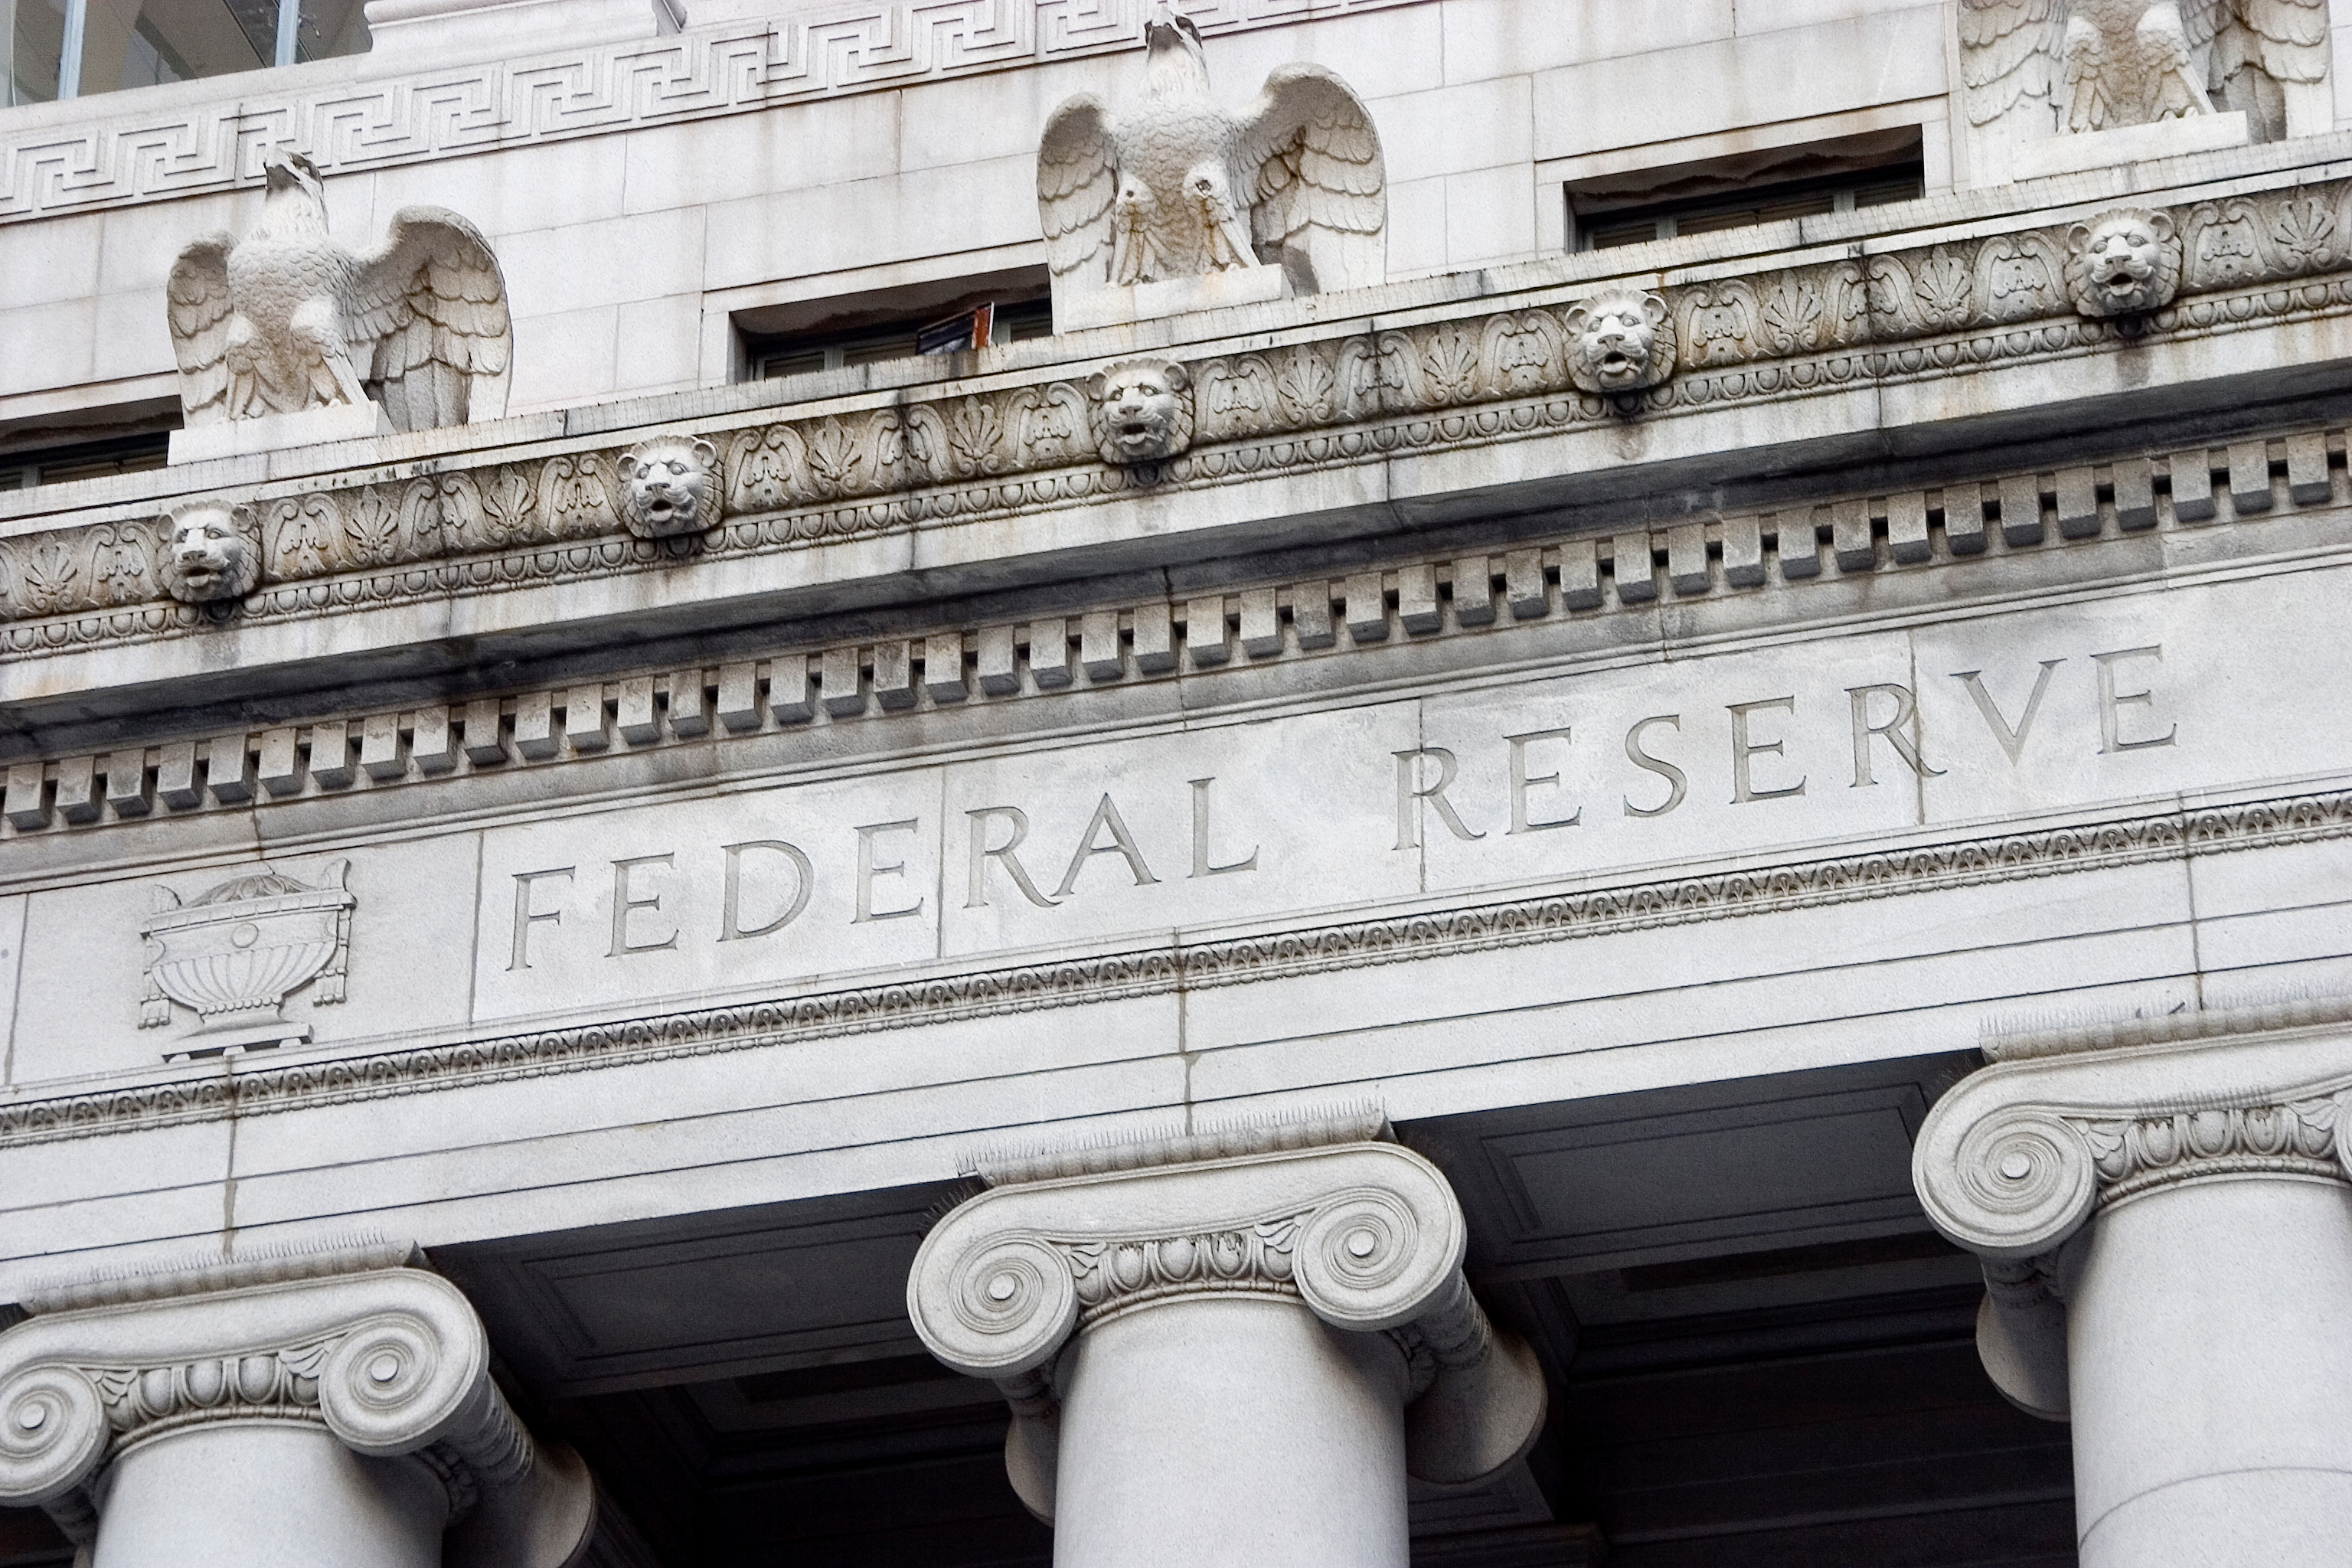 FOMC Minutes Signal Central Bank Divided on Need for More Tightening – Here is How Crypto Reacted